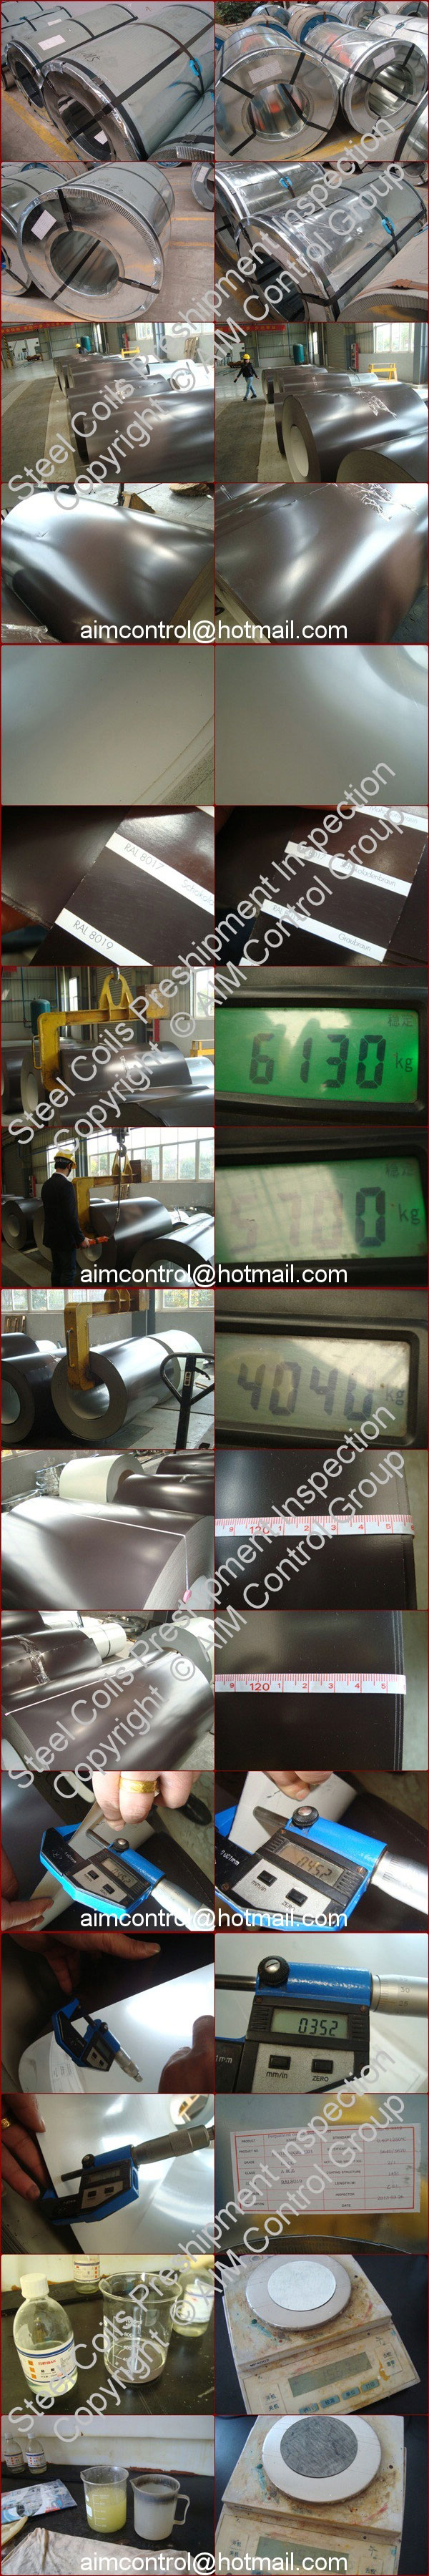 Steel_Coils_inspection_at_seller_for_exporting_services_AIM_Control